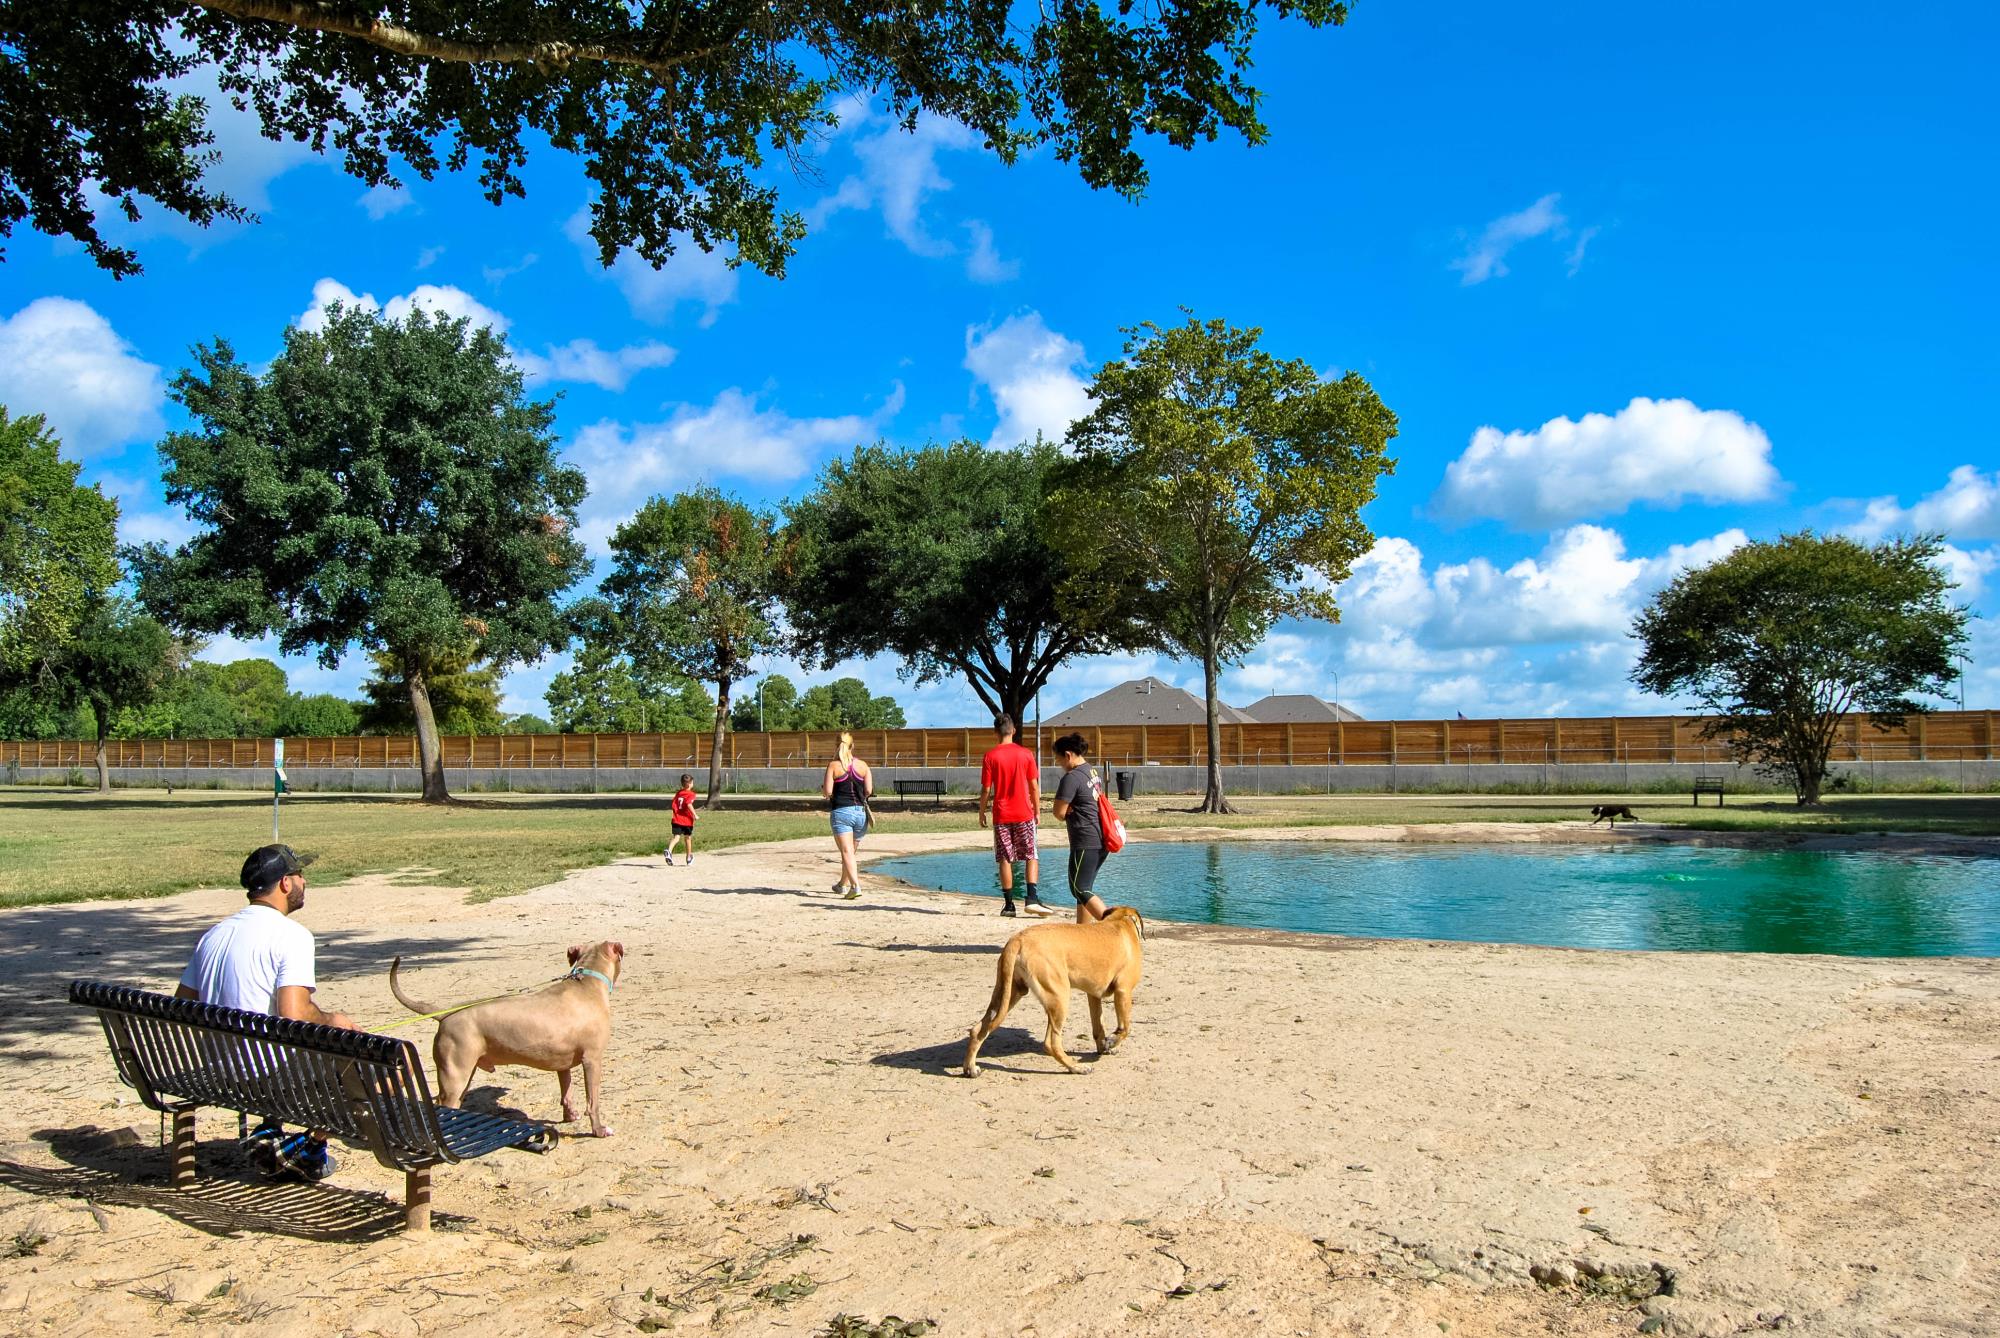 Bring Your Furry Friends to the Katy Dog Park